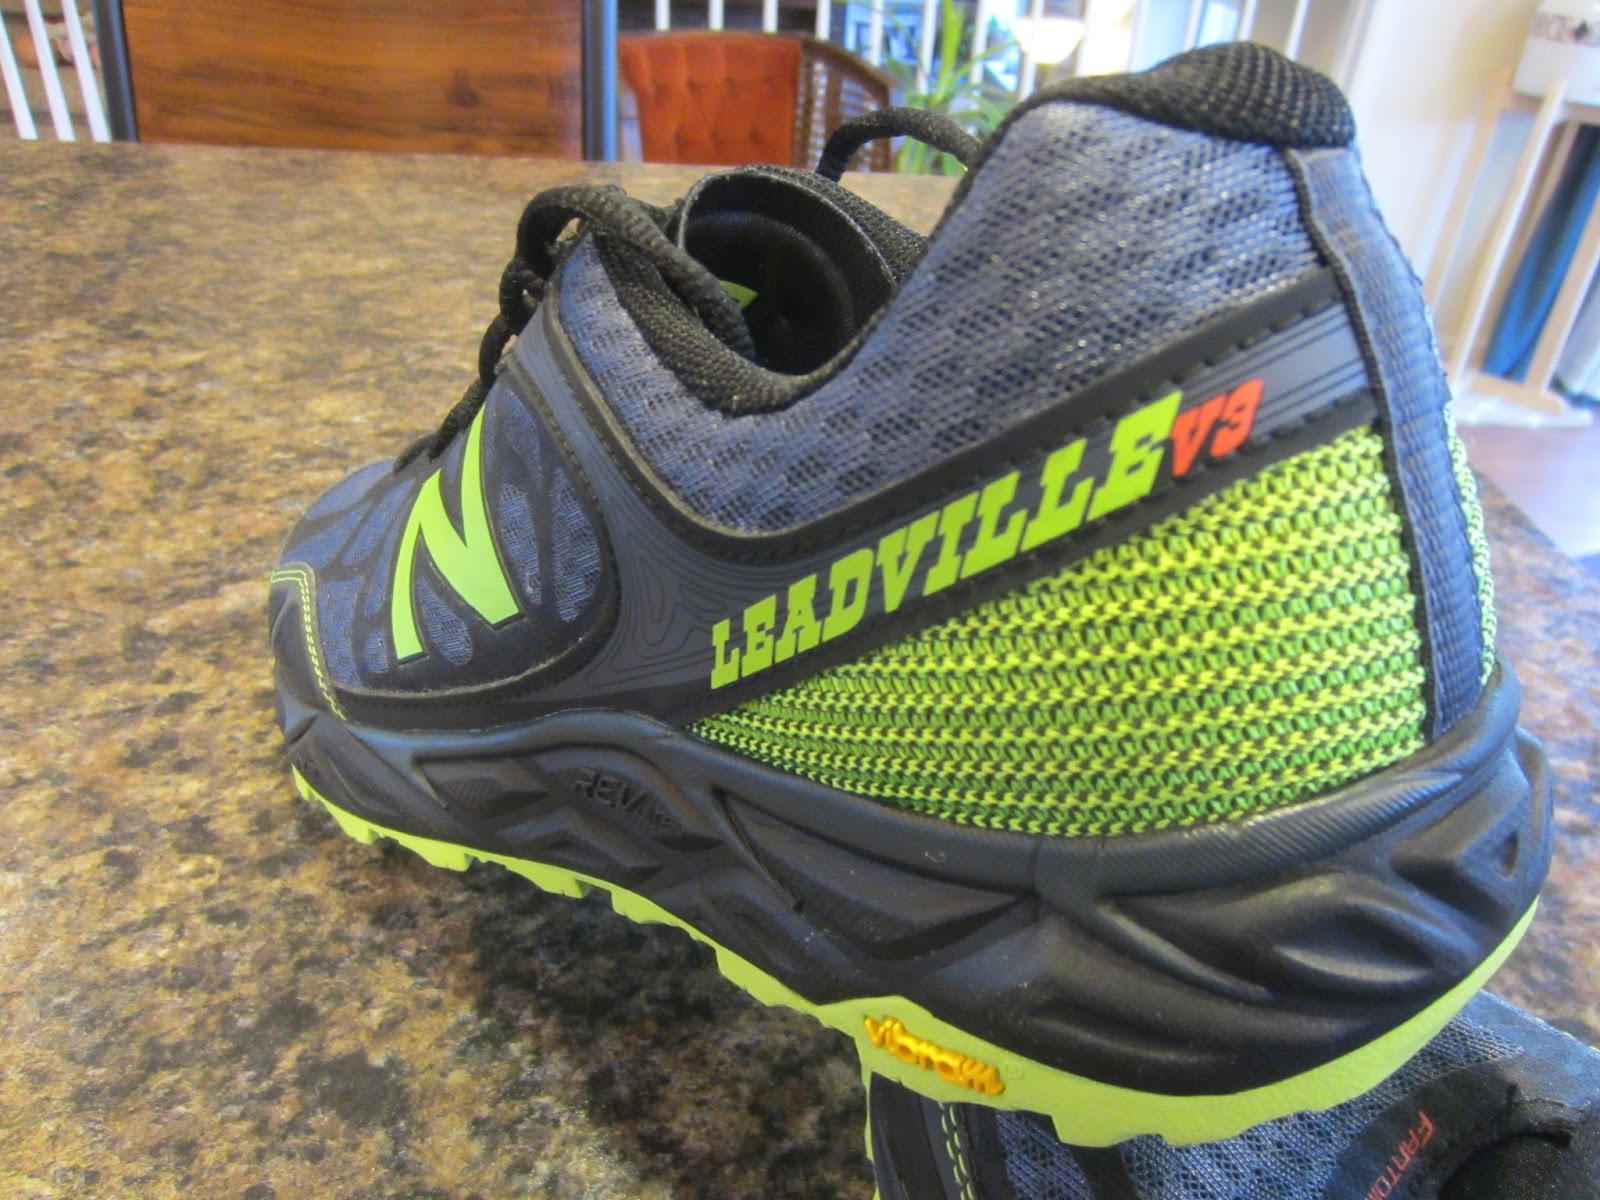 Trail Run: New Leadville v3 Accommodating Cushion and Comfort for Ultra Distance